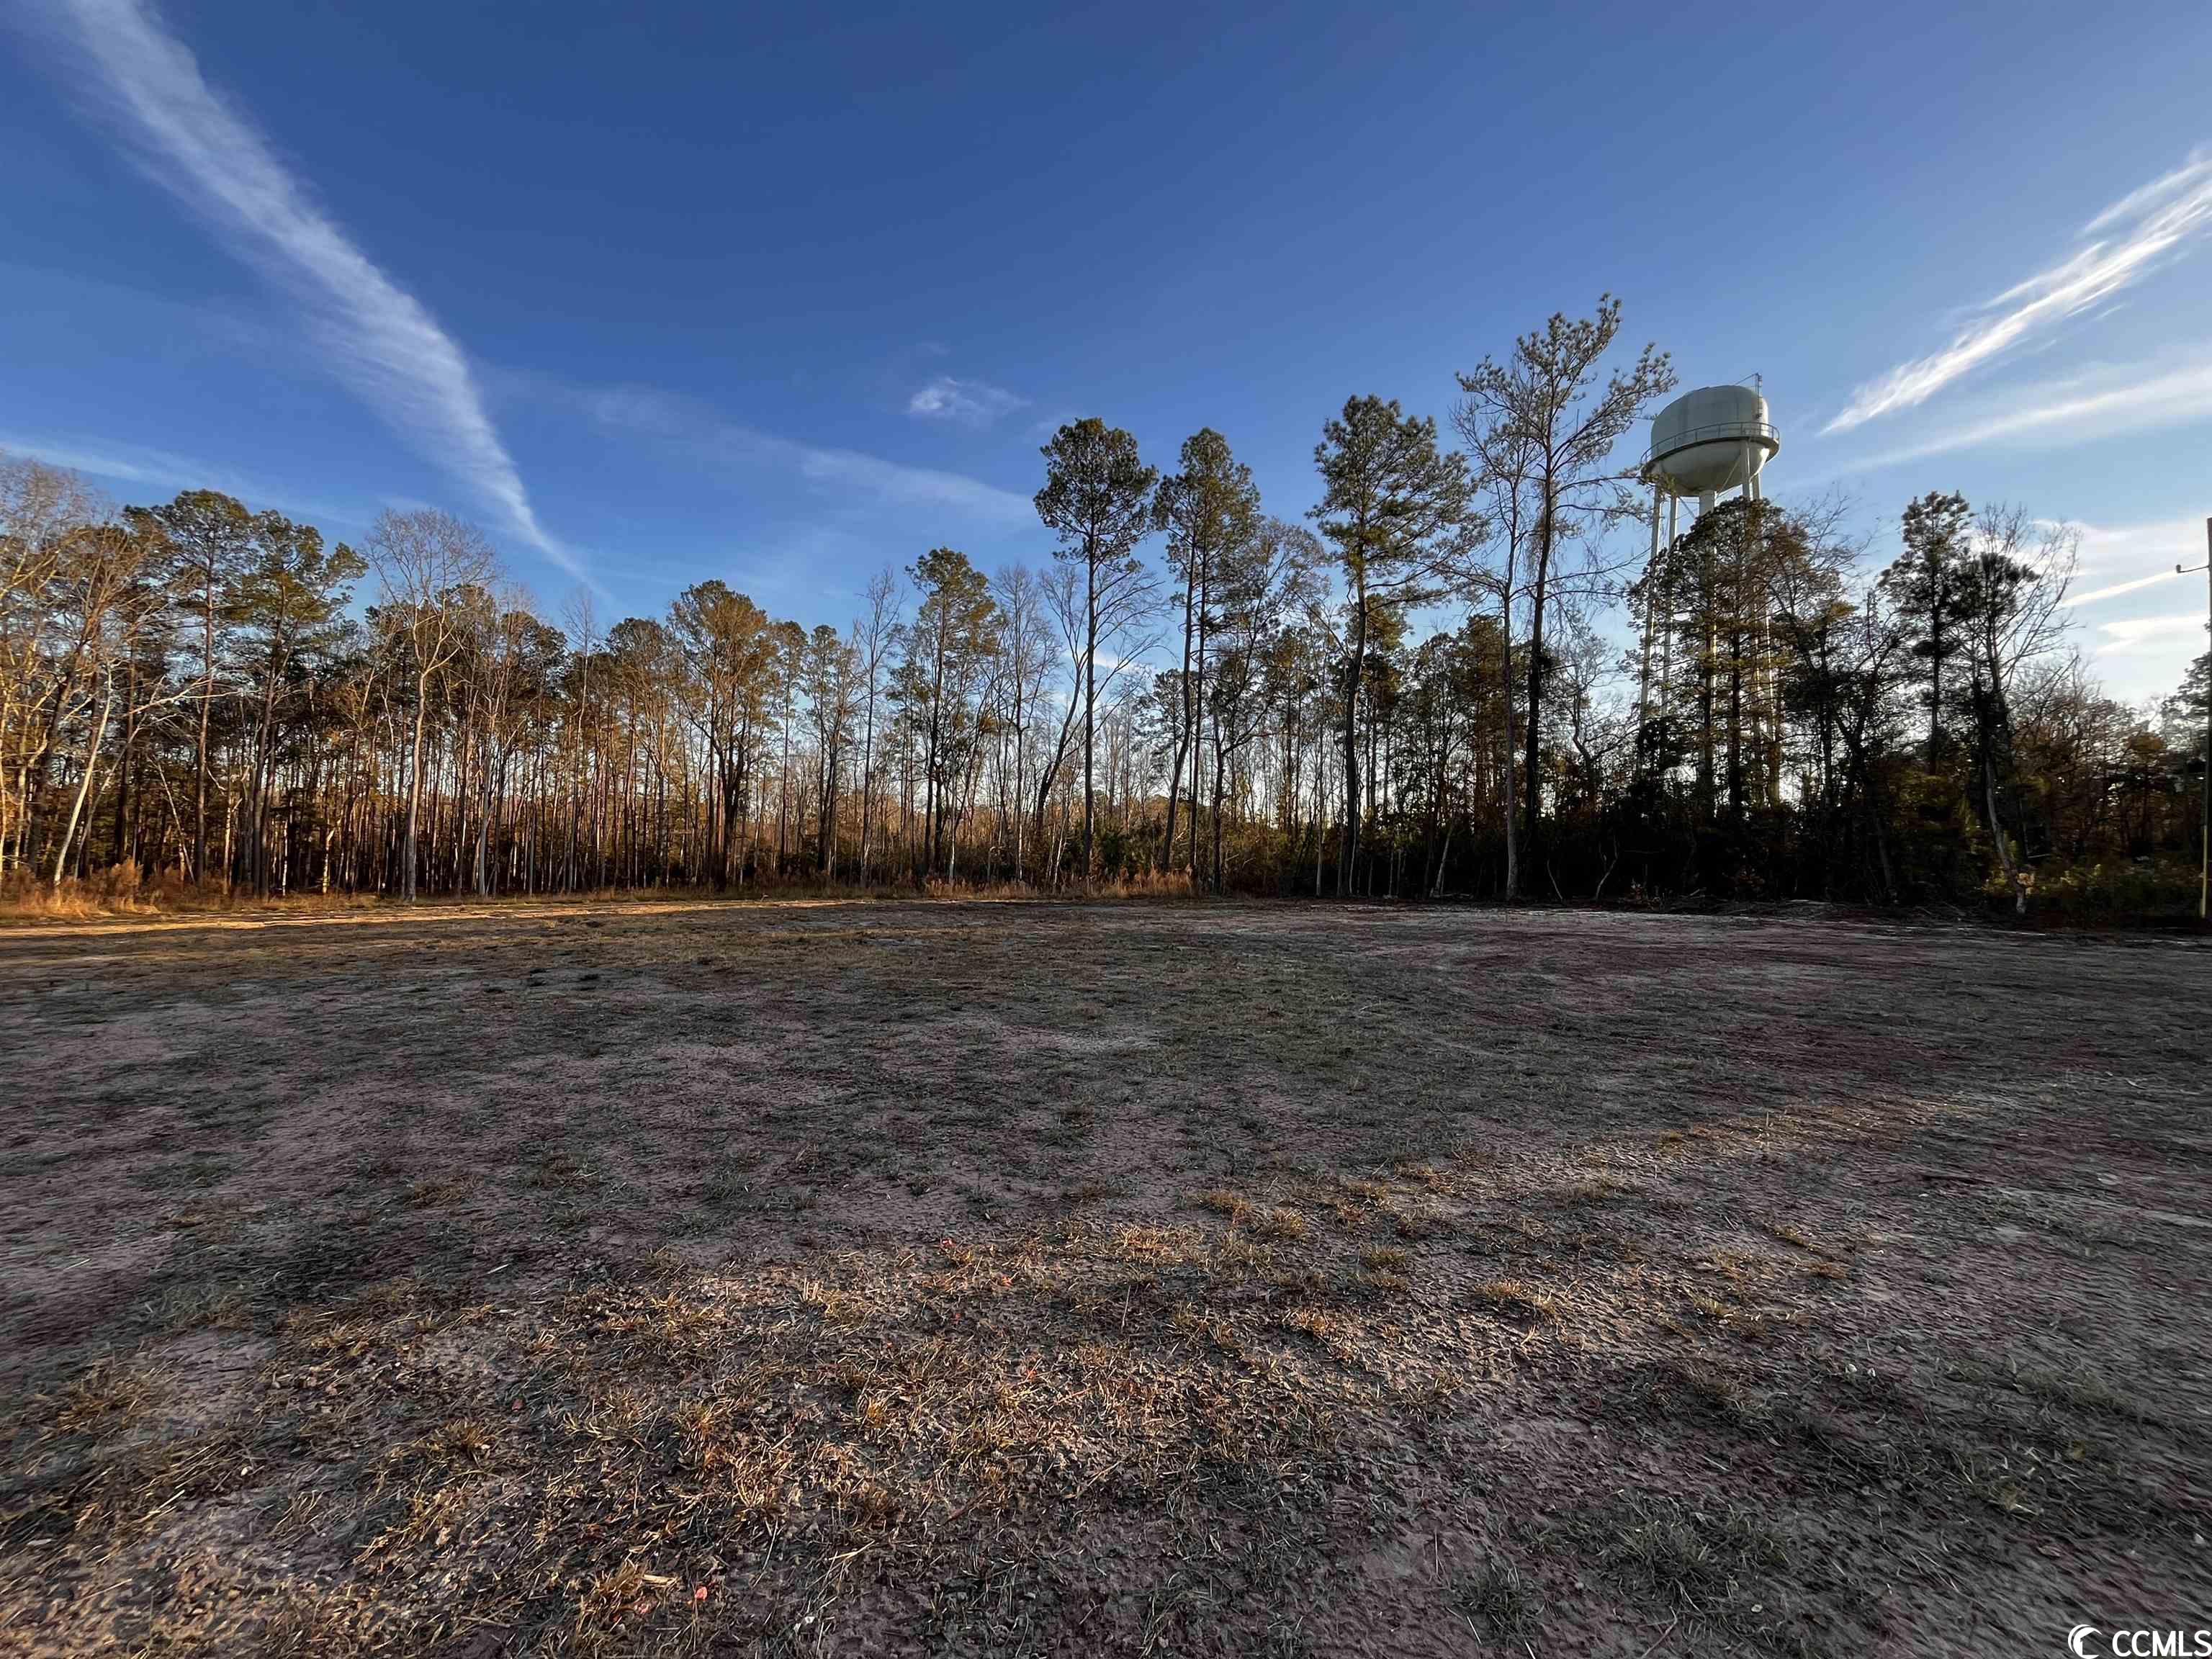 build your dream home! this 3 acre private country lot is perfectly situated in the rural outskirts of conway, just 5 miles from downtown. approximately an acre of the property has been cleared, leveled and prepared to build, and water has been run to the property. no hoa, and plenty of room to store rv's, boats and other toys. the possibilities are endless with this property! schedule your showing today.